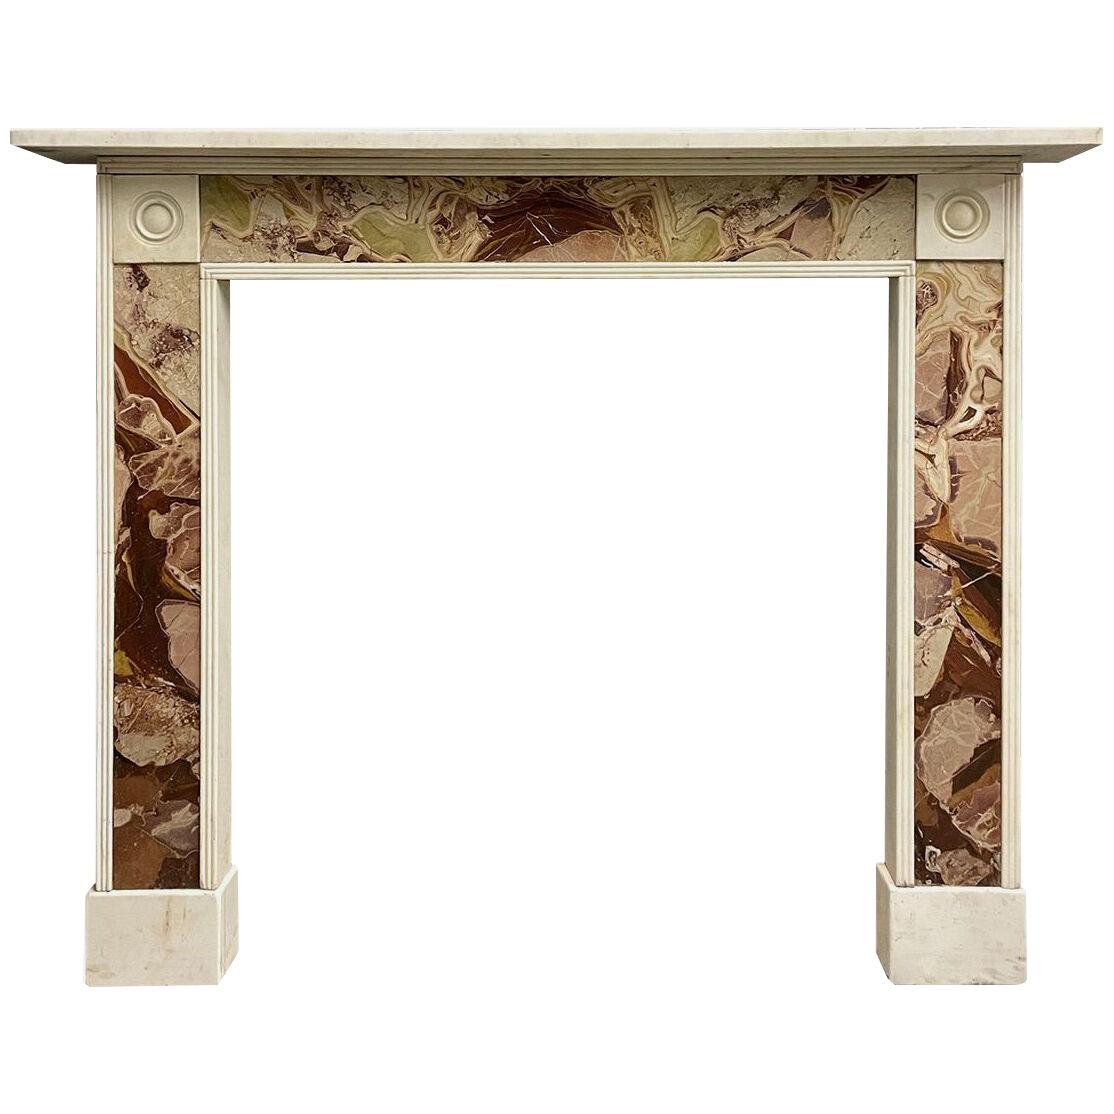 Antique English Regency Style Fireplace Mantel in Statuary and Jasper Marble